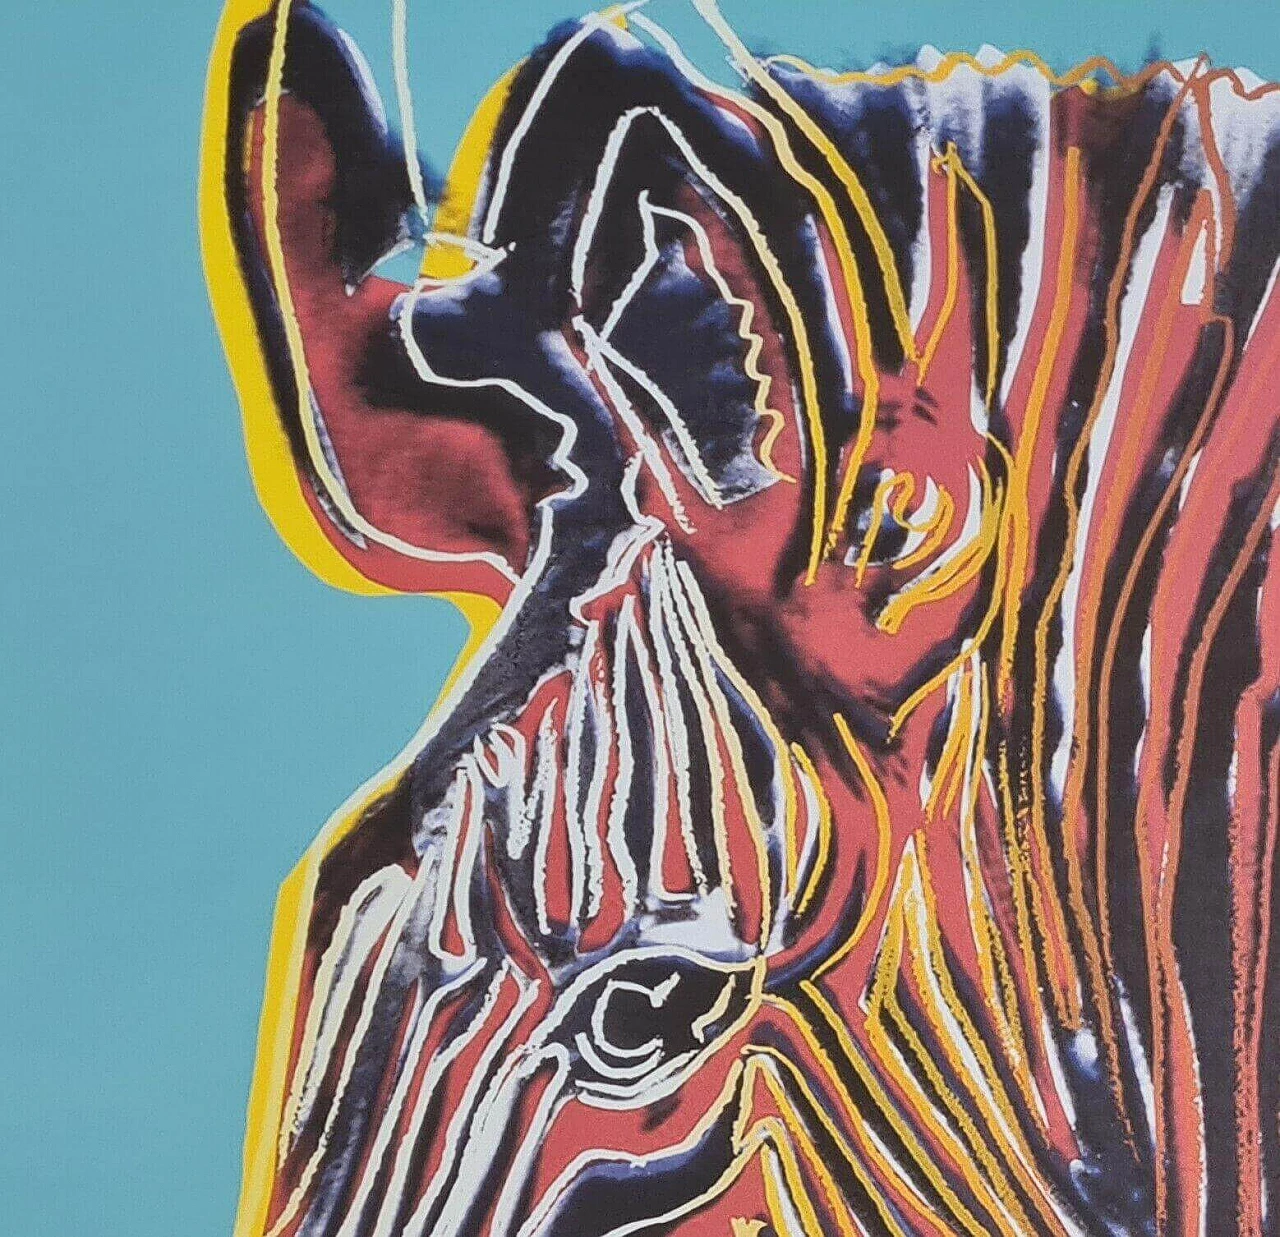 Zebra, lithography, reproduction after Andy Warhol 12